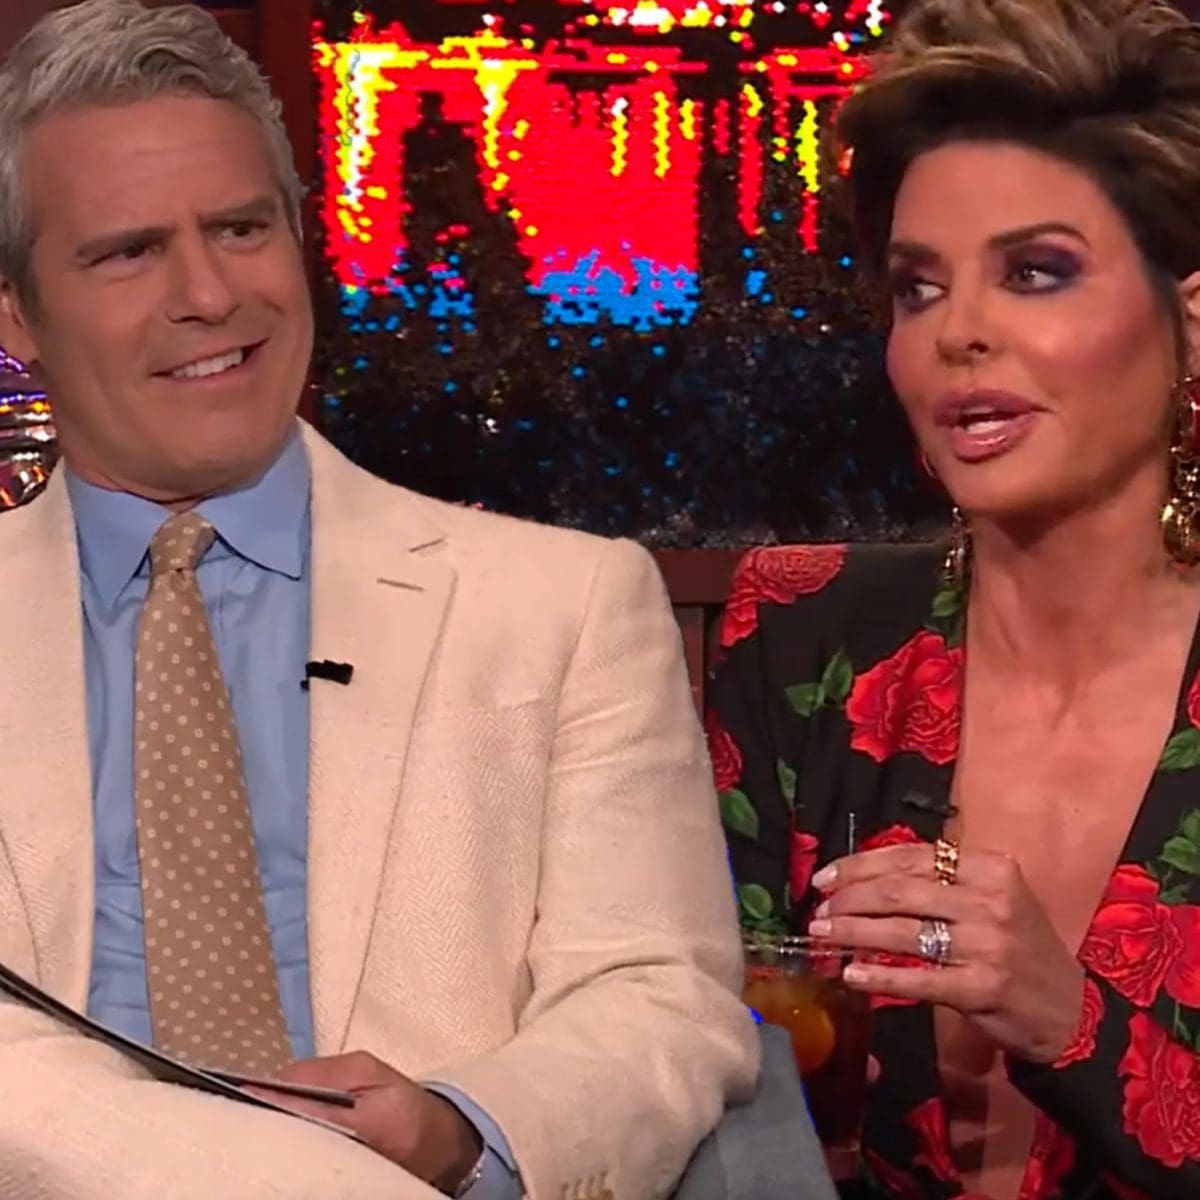 Lisa Rinna and Andy Cohen engage in conversation on WWHL